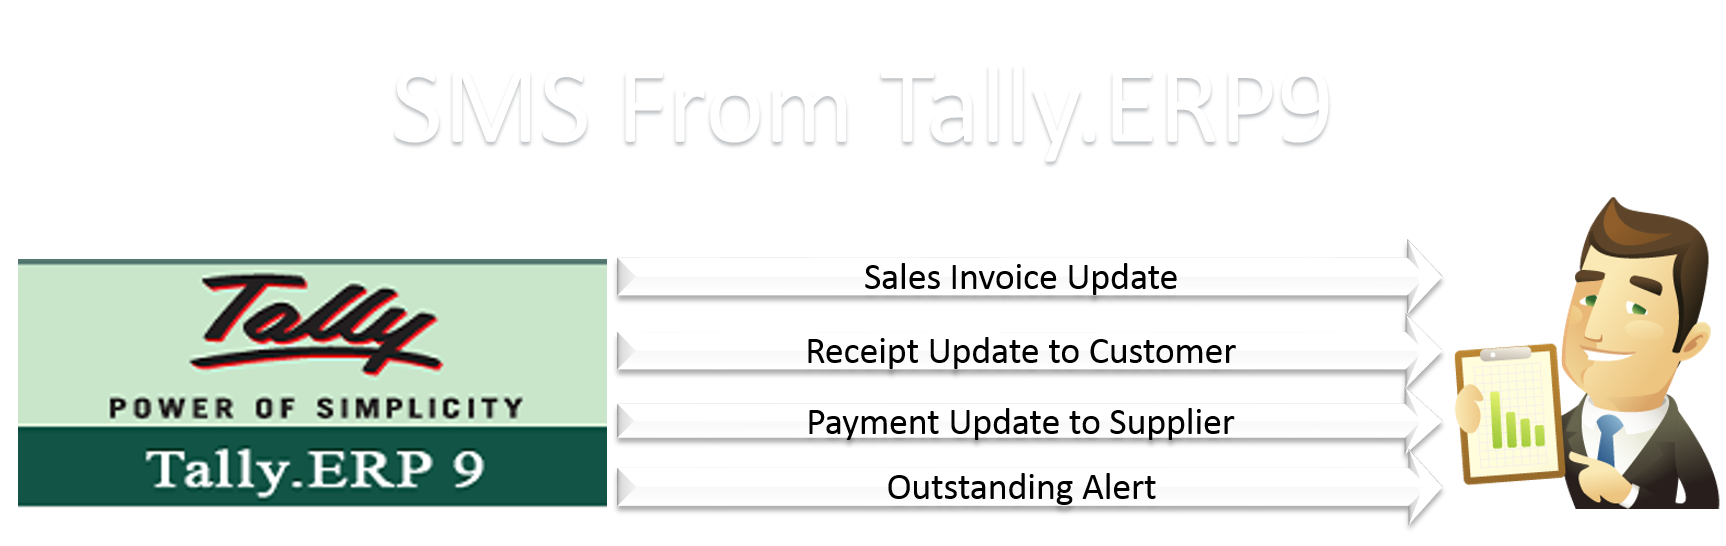 Tally SMS Solution - Send SMS From Tally.Erp9